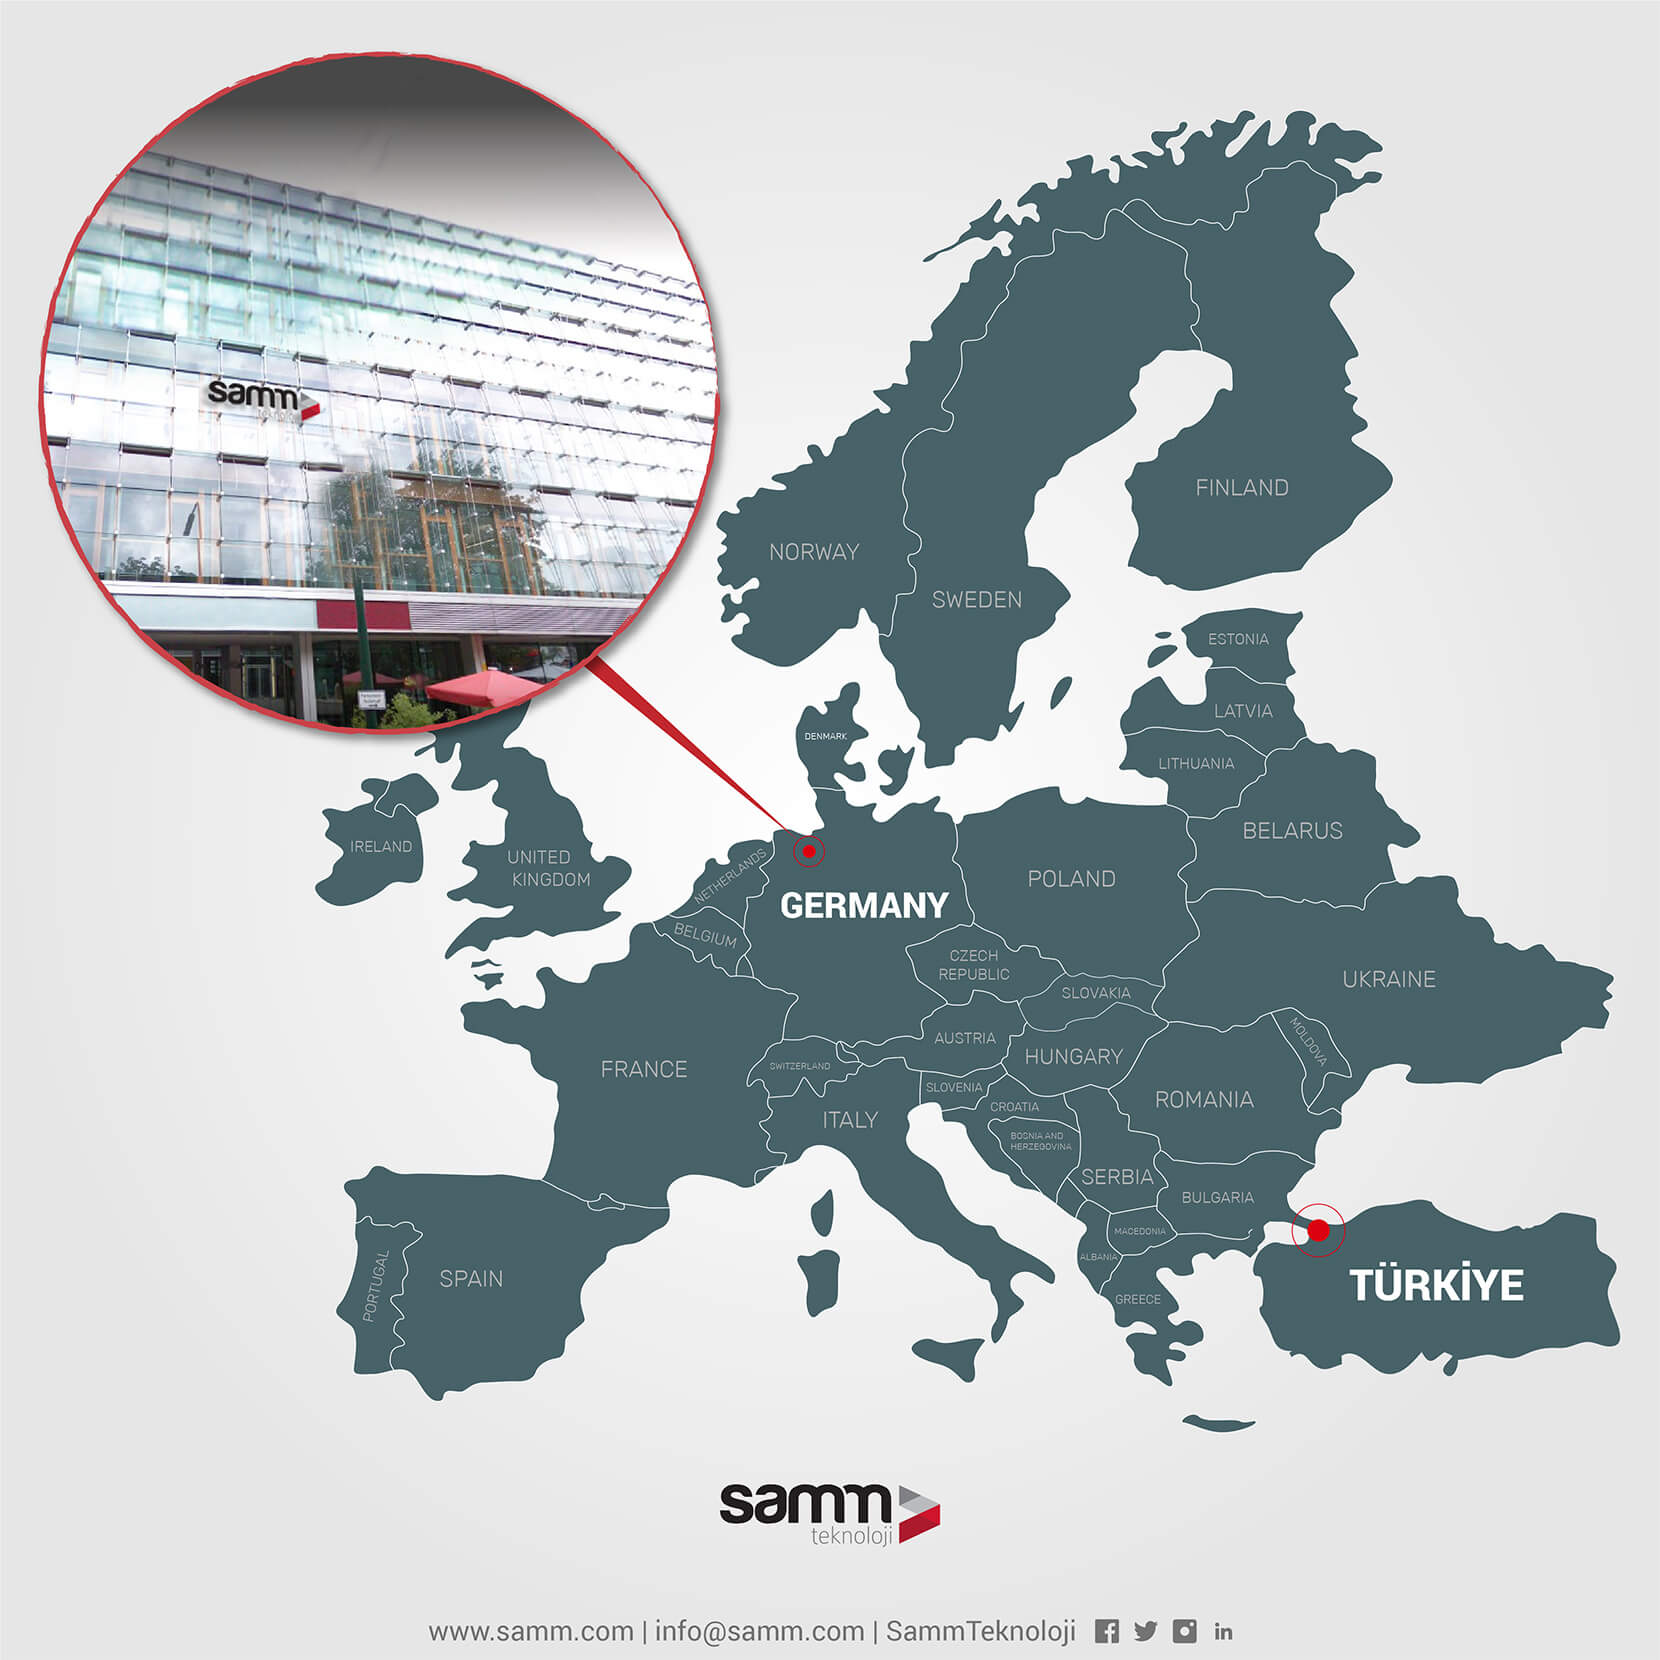 SAMM GmbH, Officially Launched